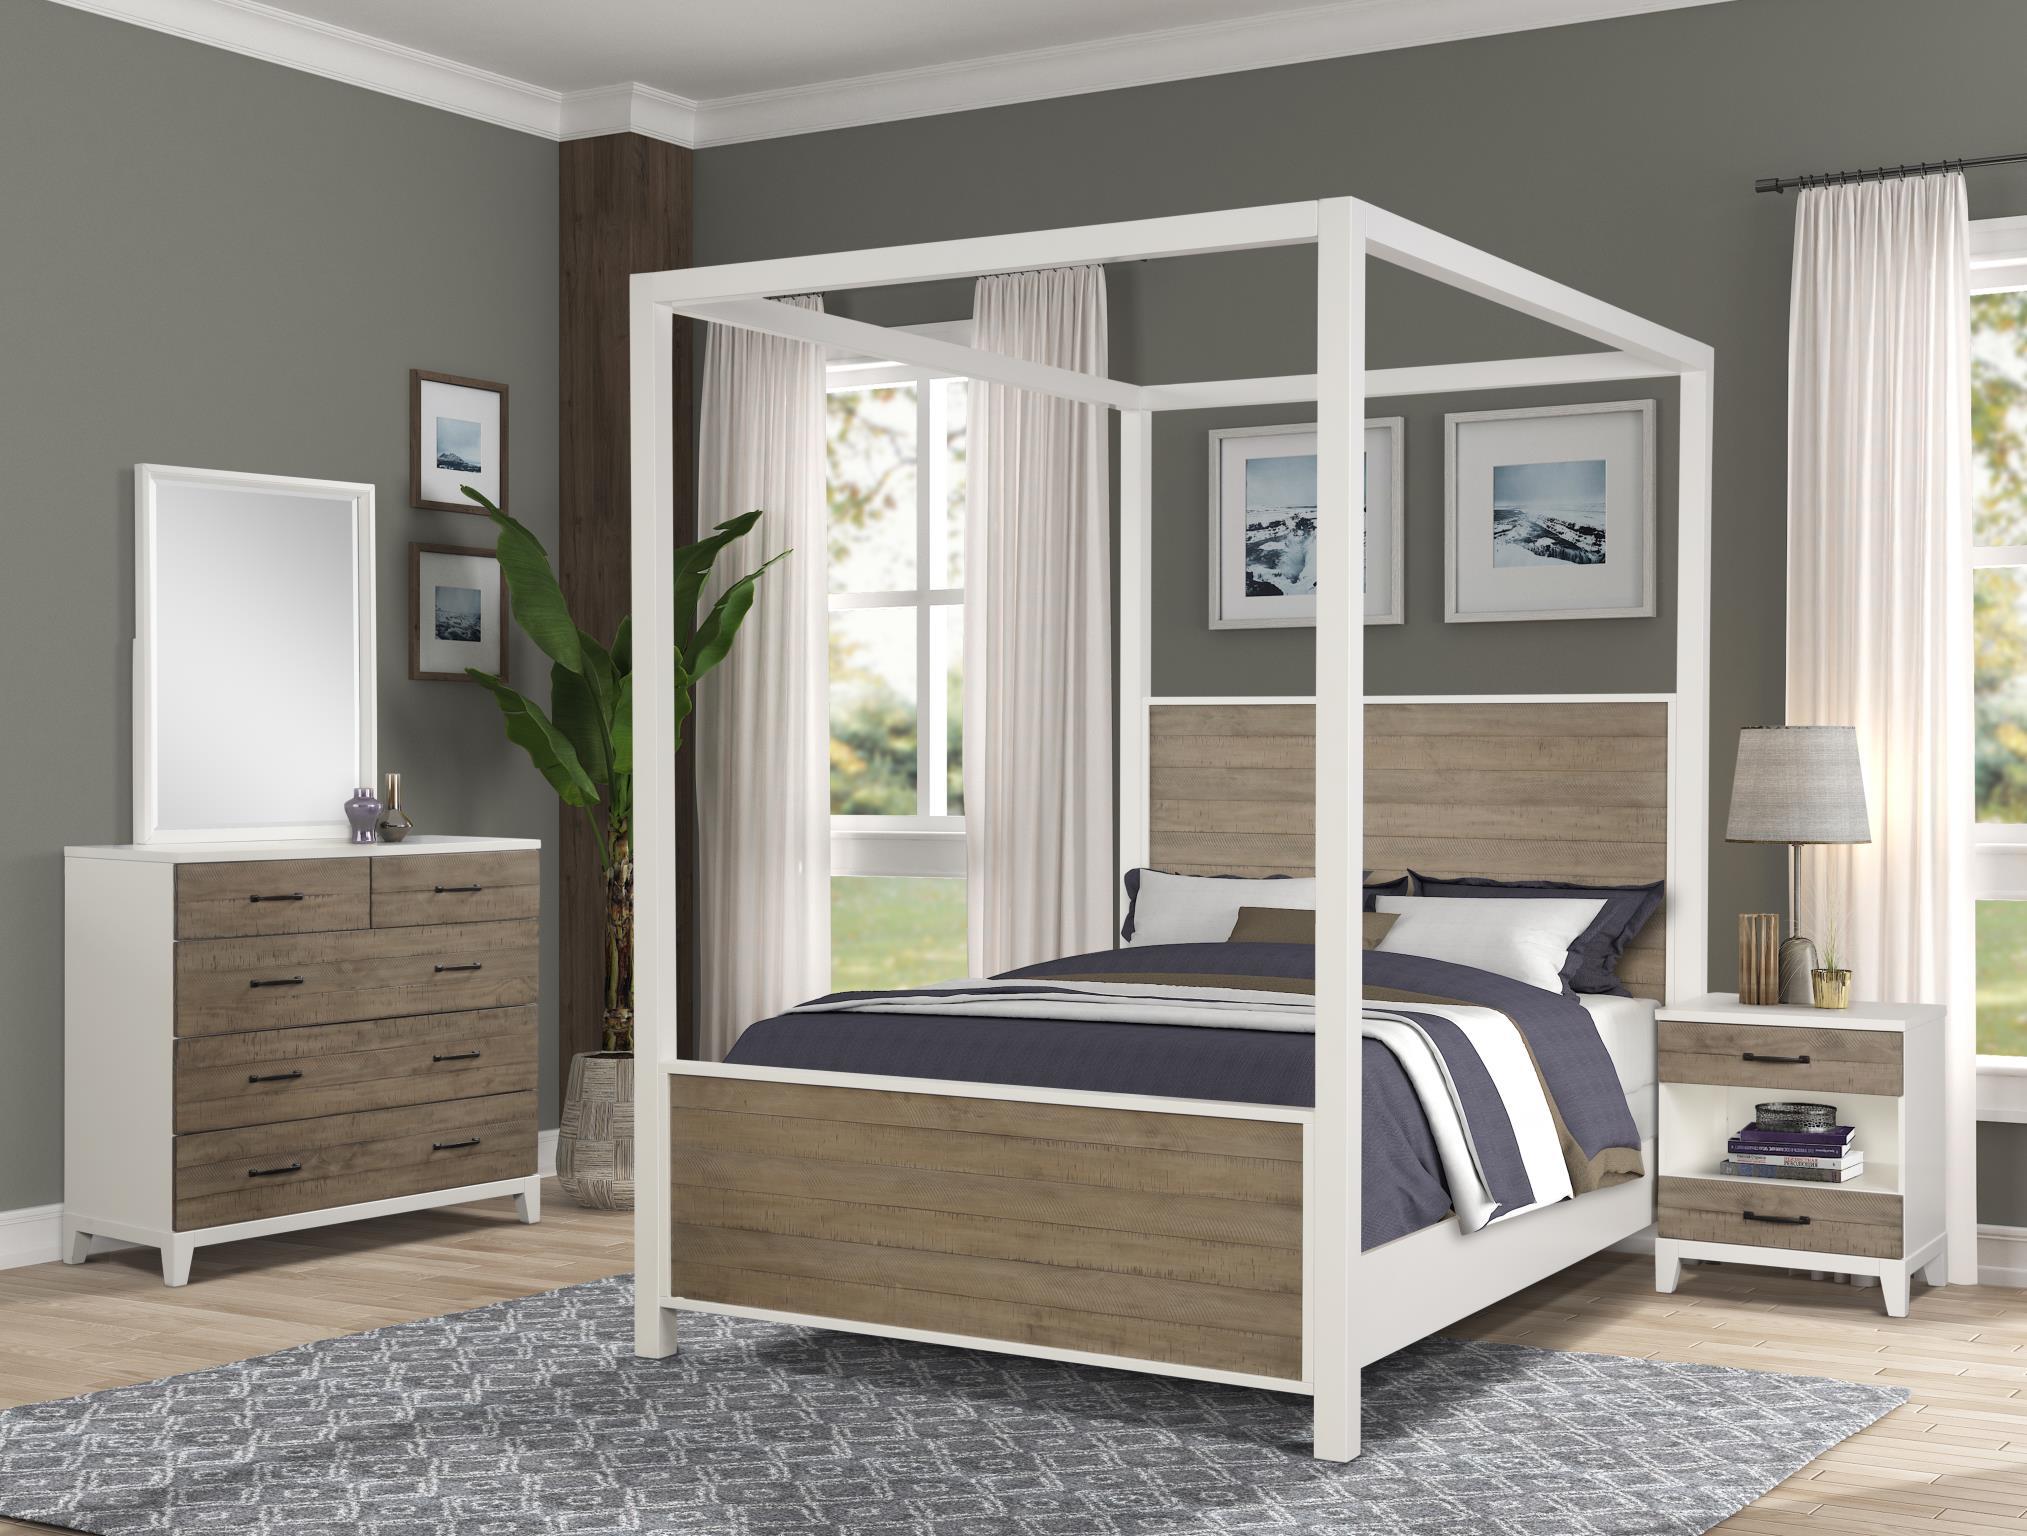 Contemporary, Transitional Canopy Bed DAYDREAMS 1288-108 1288-108 in Brown Oak 